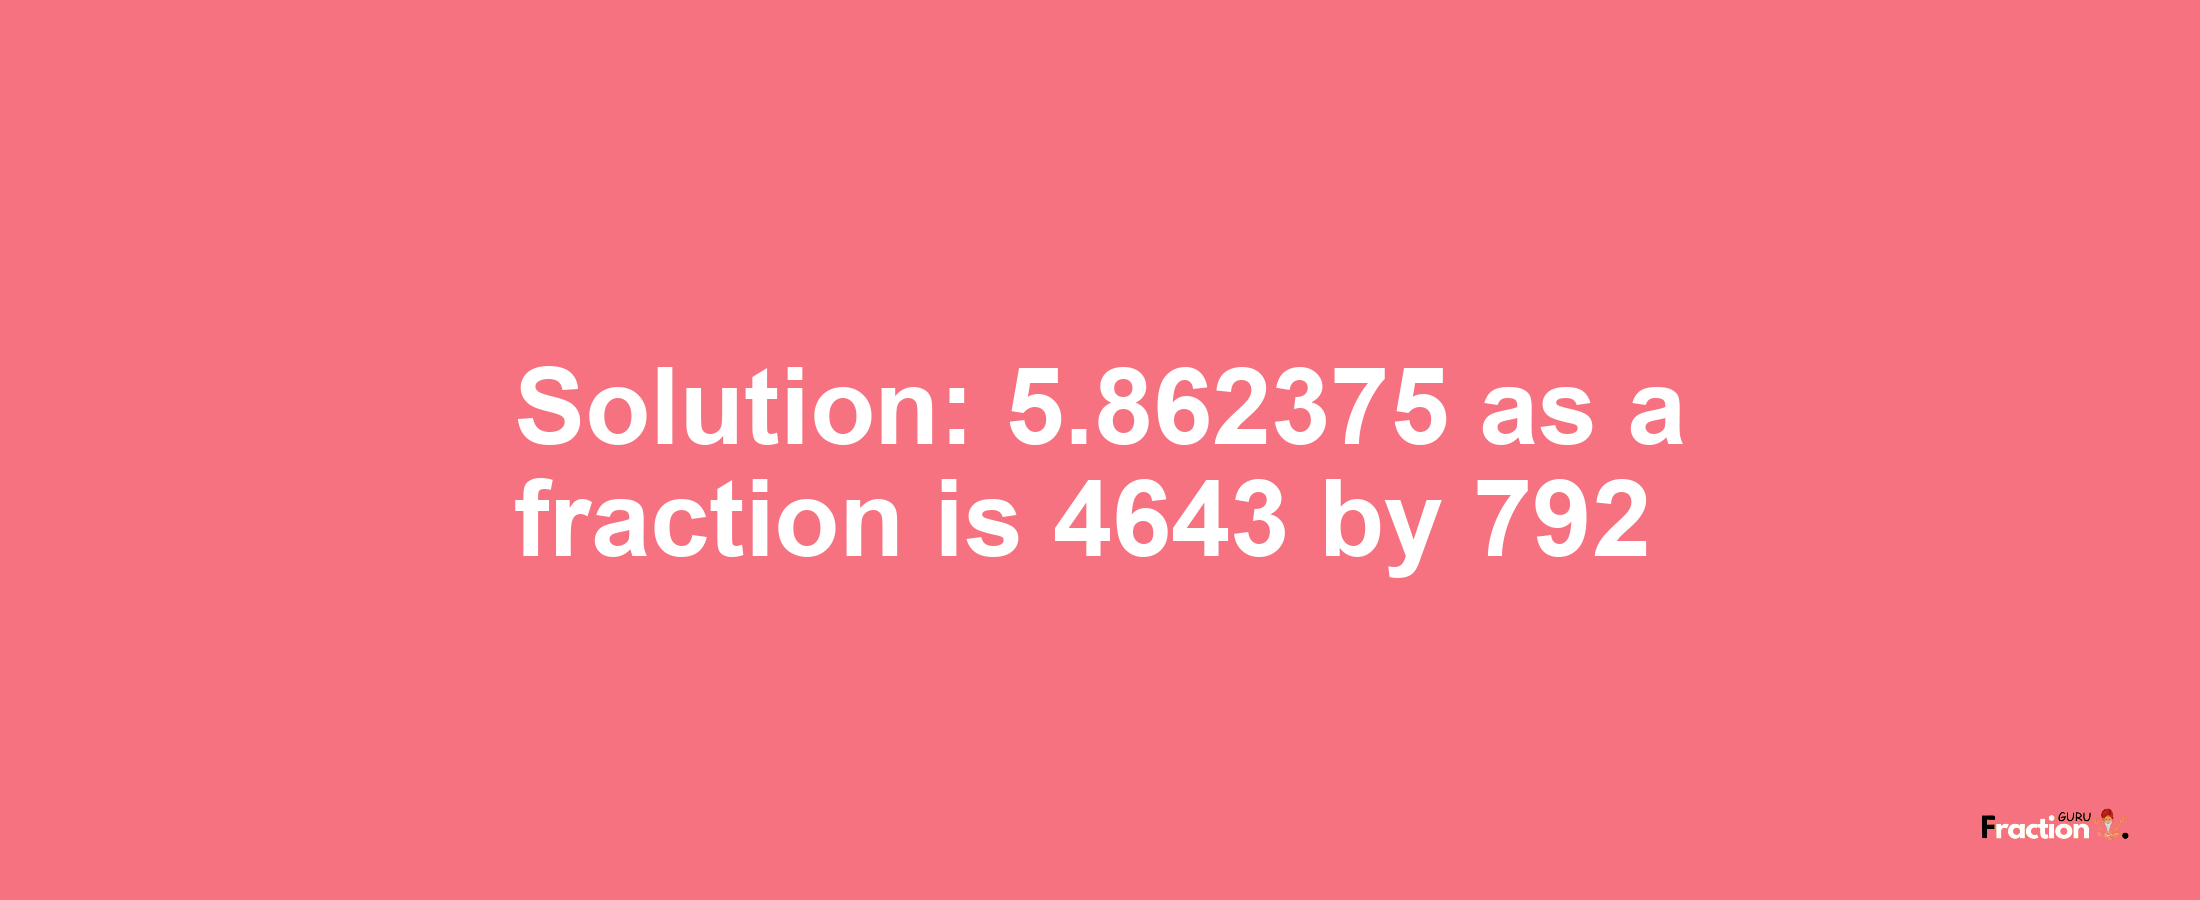 Solution:5.862375 as a fraction is 4643/792